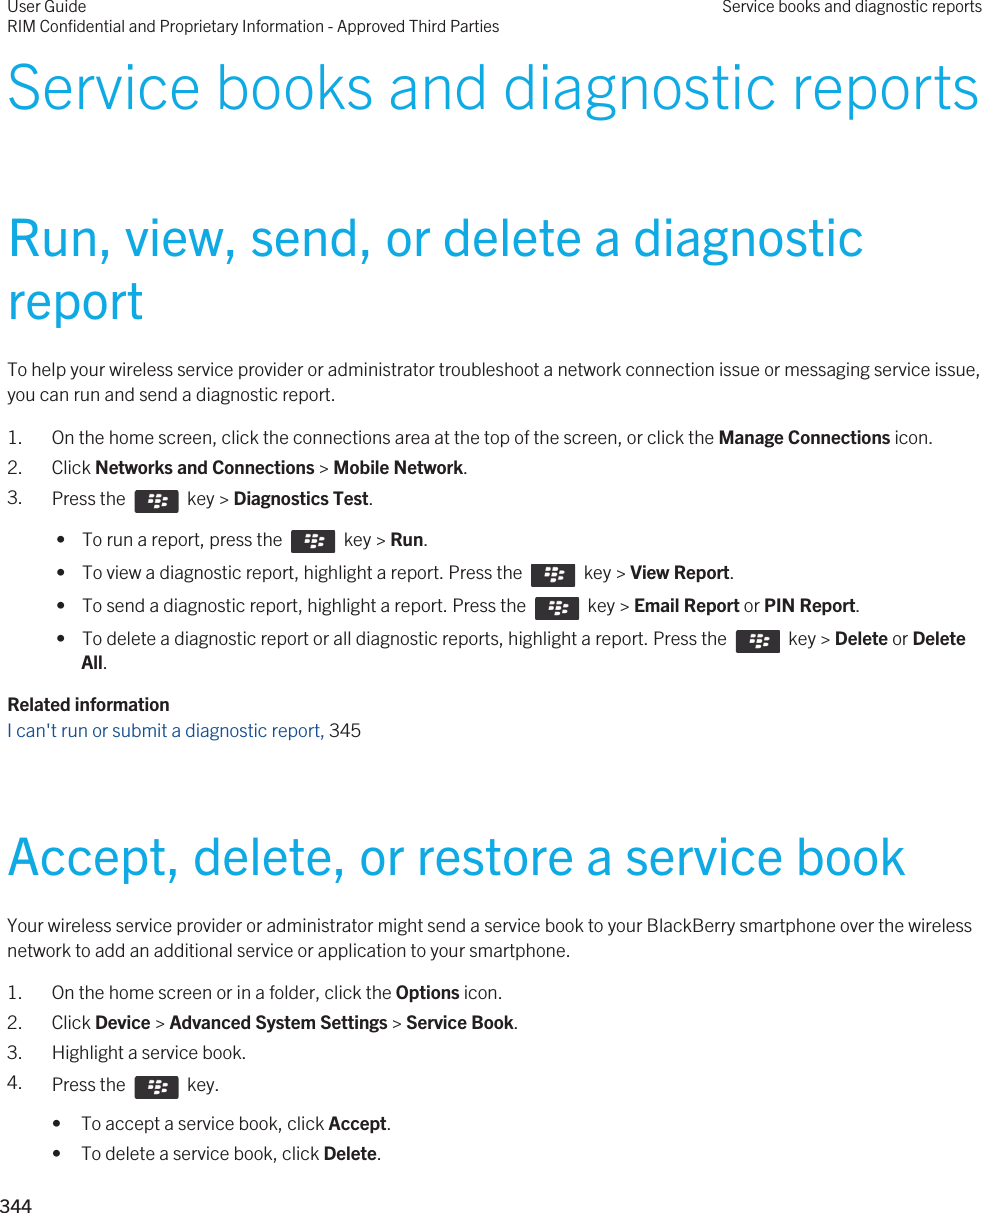 Service books and diagnostic reportsRun, view, send, or delete a diagnostic reportTo help your wireless service provider or administrator troubleshoot a network connection issue or messaging service issue, you can run and send a diagnostic report.1. On the home screen, click the connections area at the top of the screen, or click the Manage Connections icon.2. Click Networks and Connections &gt; Mobile Network.3. Press the    key &gt; Diagnostics Test.  •  To run a report, press the    key &gt; Run. •  To view a diagnostic report, highlight a report. Press the    key &gt; View Report. •  To send a diagnostic report, highlight a report. Press the    key &gt; Email Report or PIN Report. •  To delete a diagnostic report or all diagnostic reports, highlight a report. Press the    key &gt; Delete or Delete All.Related informationI can&apos;t run or submit a diagnostic report, 345Accept, delete, or restore a service bookYour wireless service provider or administrator might send a service book to your BlackBerry smartphone over the wireless network to add an additional service or application to your smartphone.1. On the home screen or in a folder, click the Options icon.2. Click Device &gt; Advanced System Settings &gt; Service Book.3. Highlight a service book.4. Press the    key. • To accept a service book, click Accept.• To delete a service book, click Delete.User GuideRIM Confidential and Proprietary Information - Approved Third PartiesService books and diagnostic reports344 